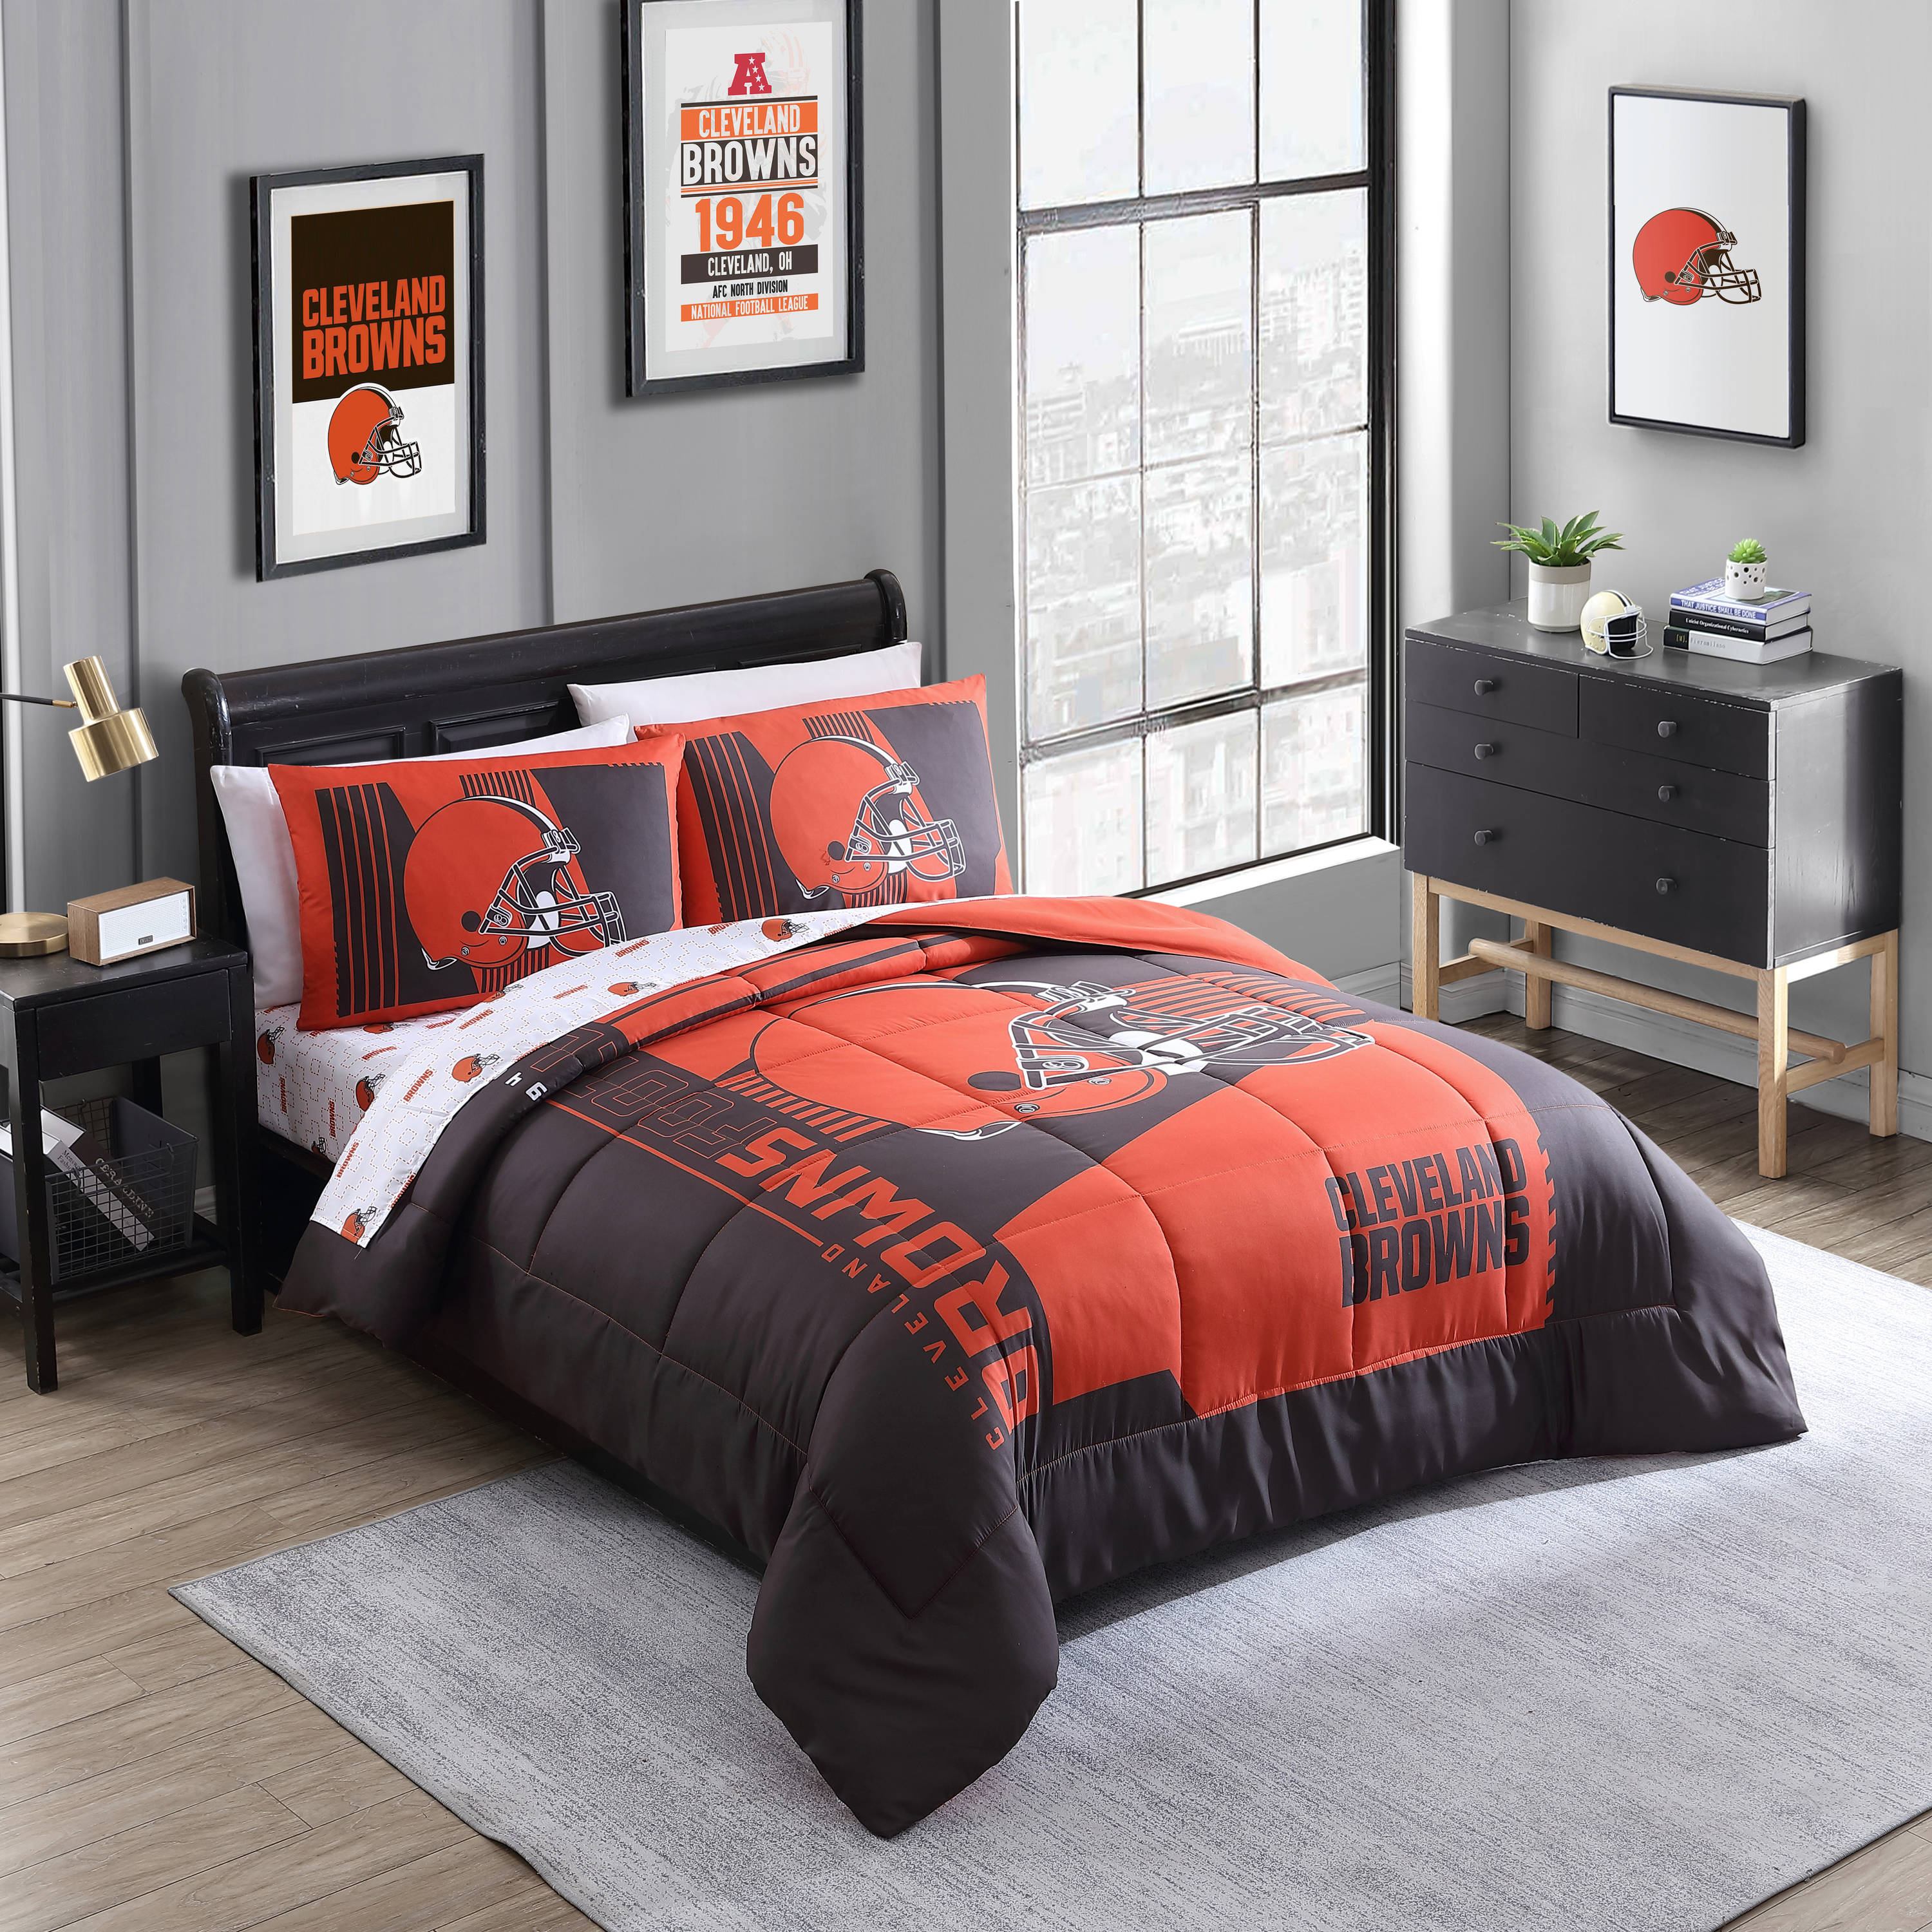 Cleveland Browns Thermal Curtain 2 Panels Bedroom Living Room Window Drapes Gift 